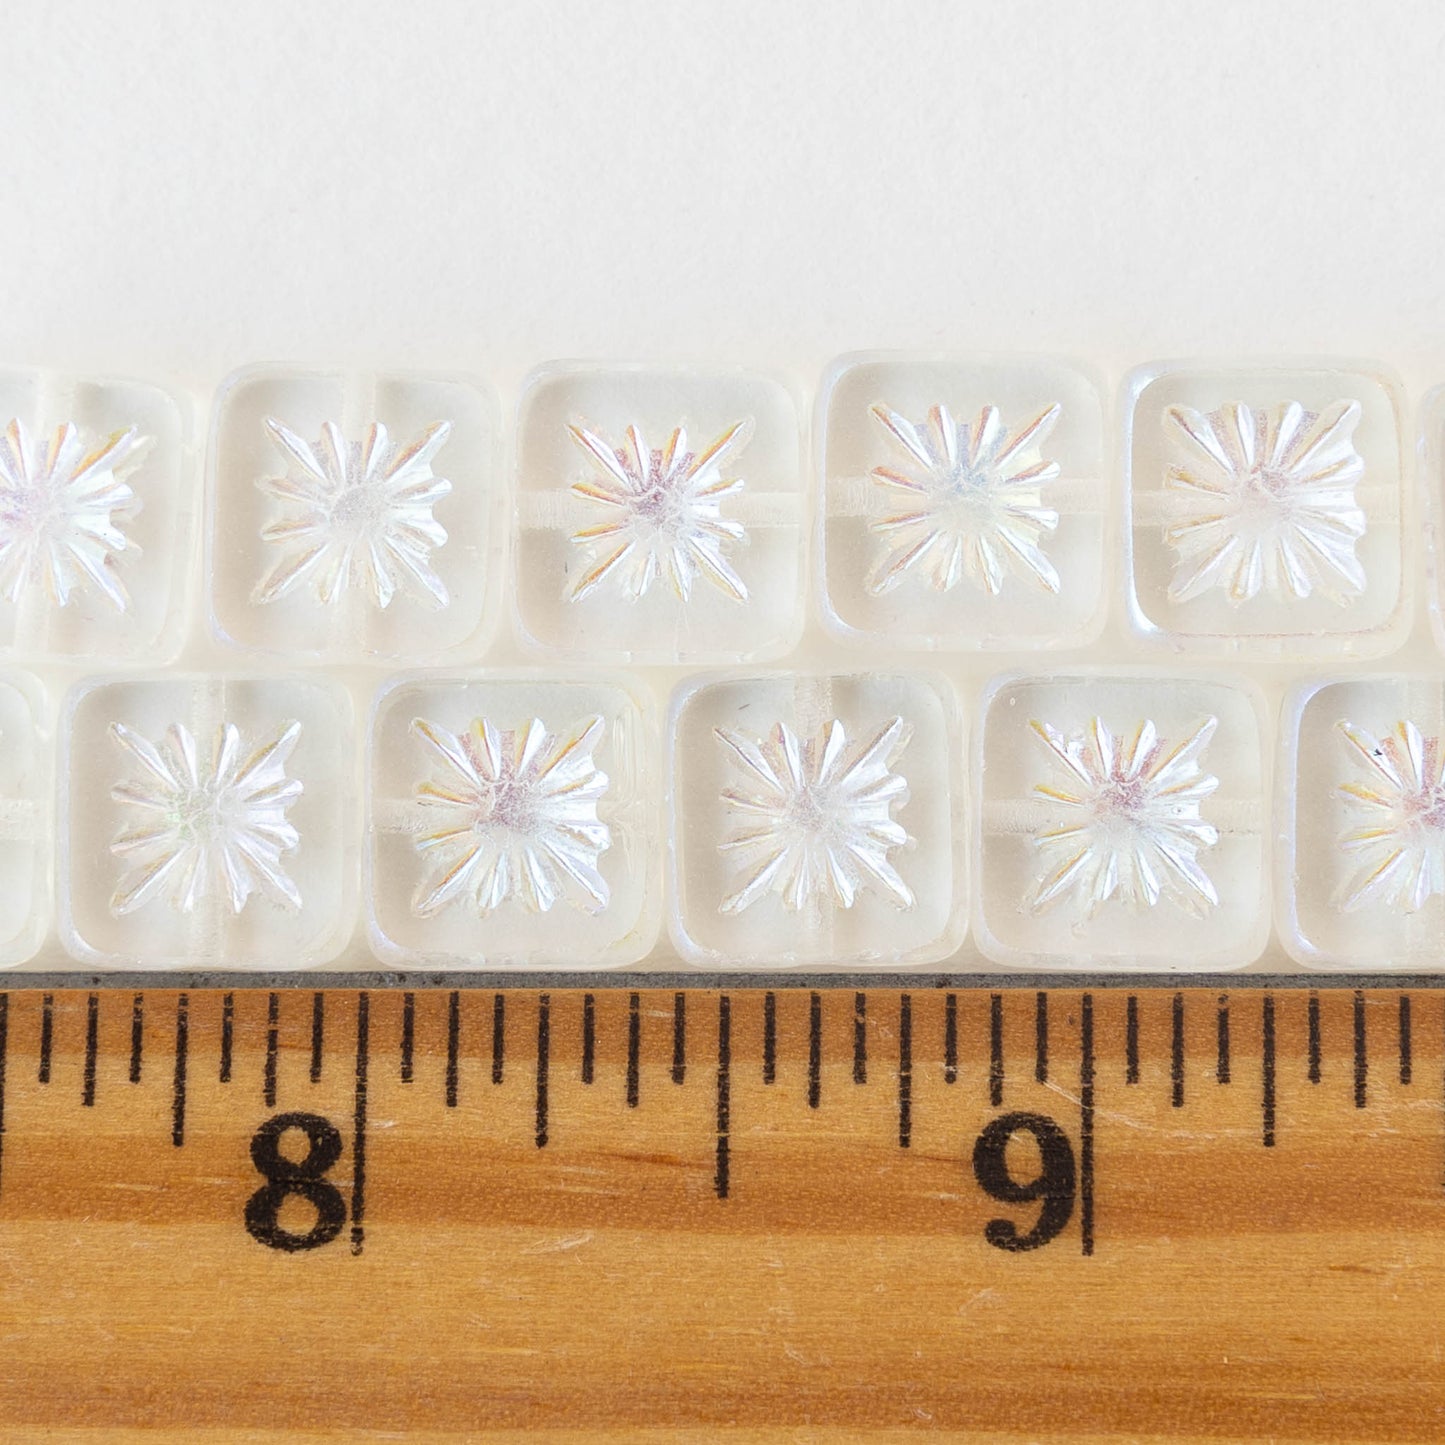 10mm Glass Tile Beads - Crystal AB - 10 or 30